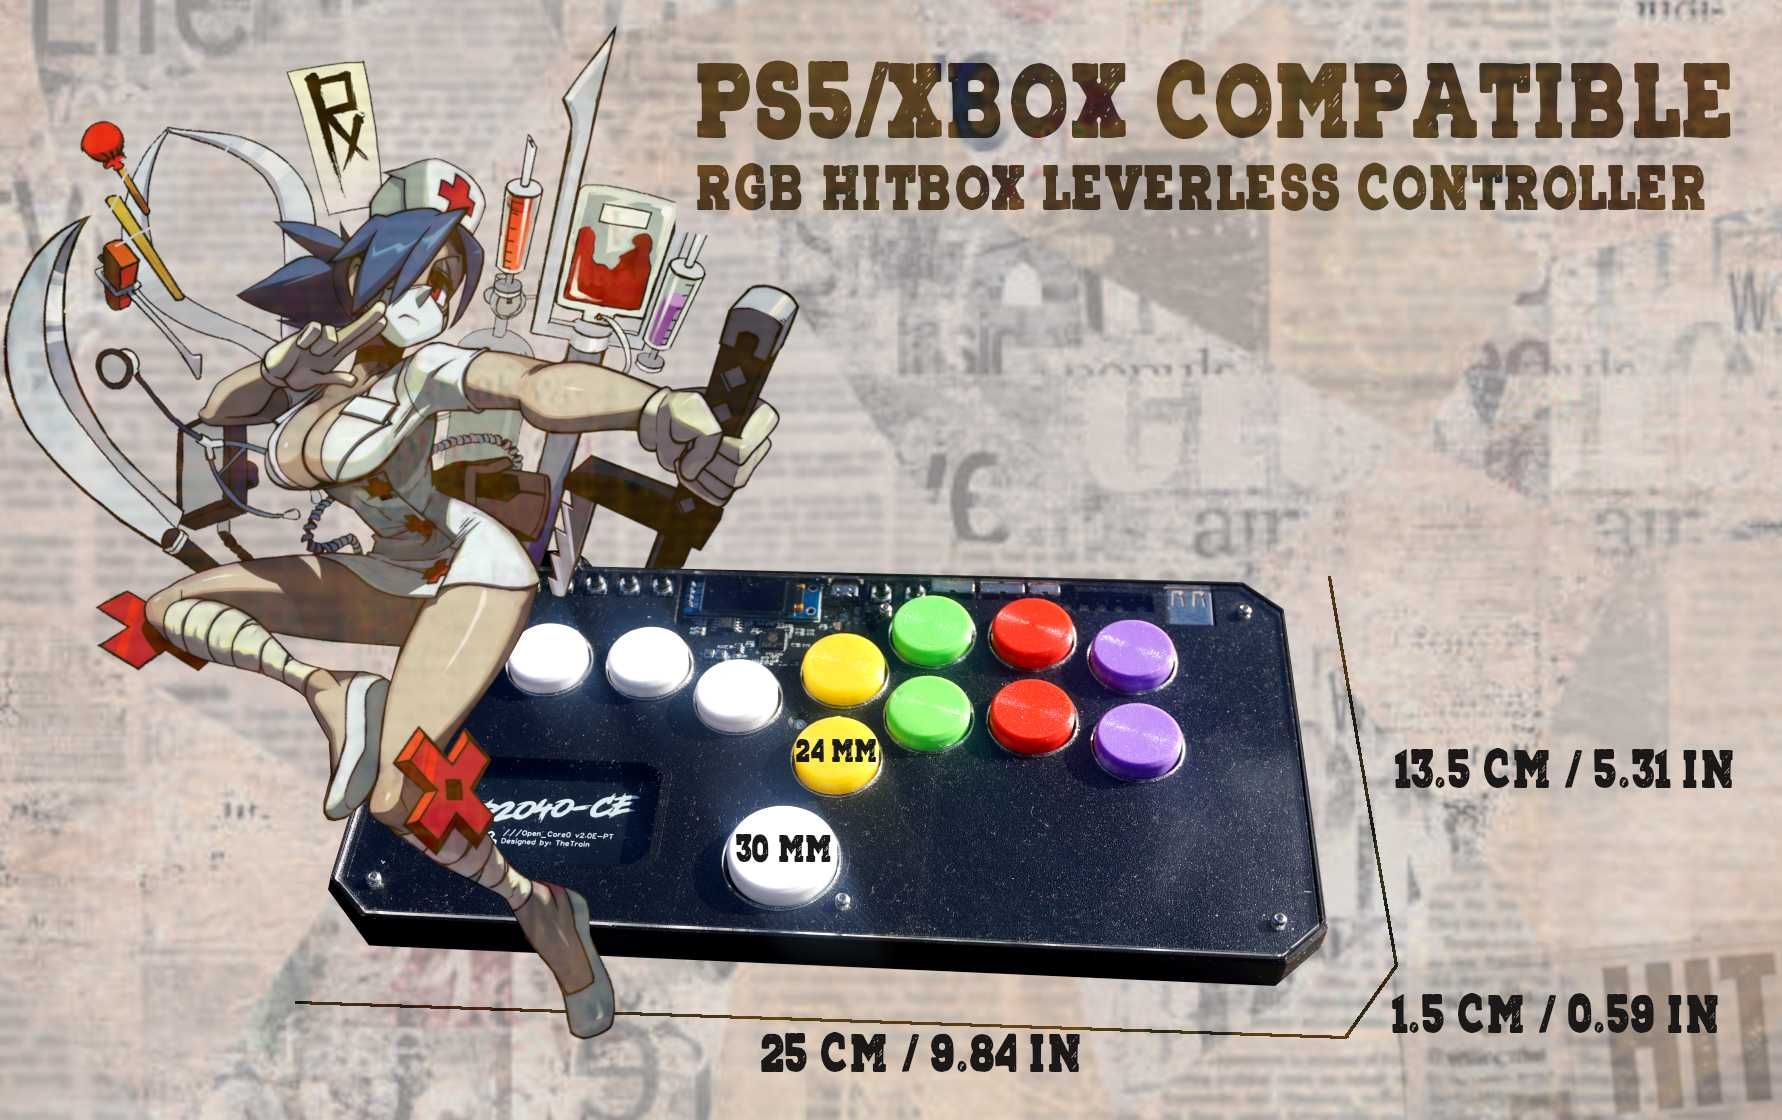 PS5/XBOX compatible RGB hitbox leverless controller